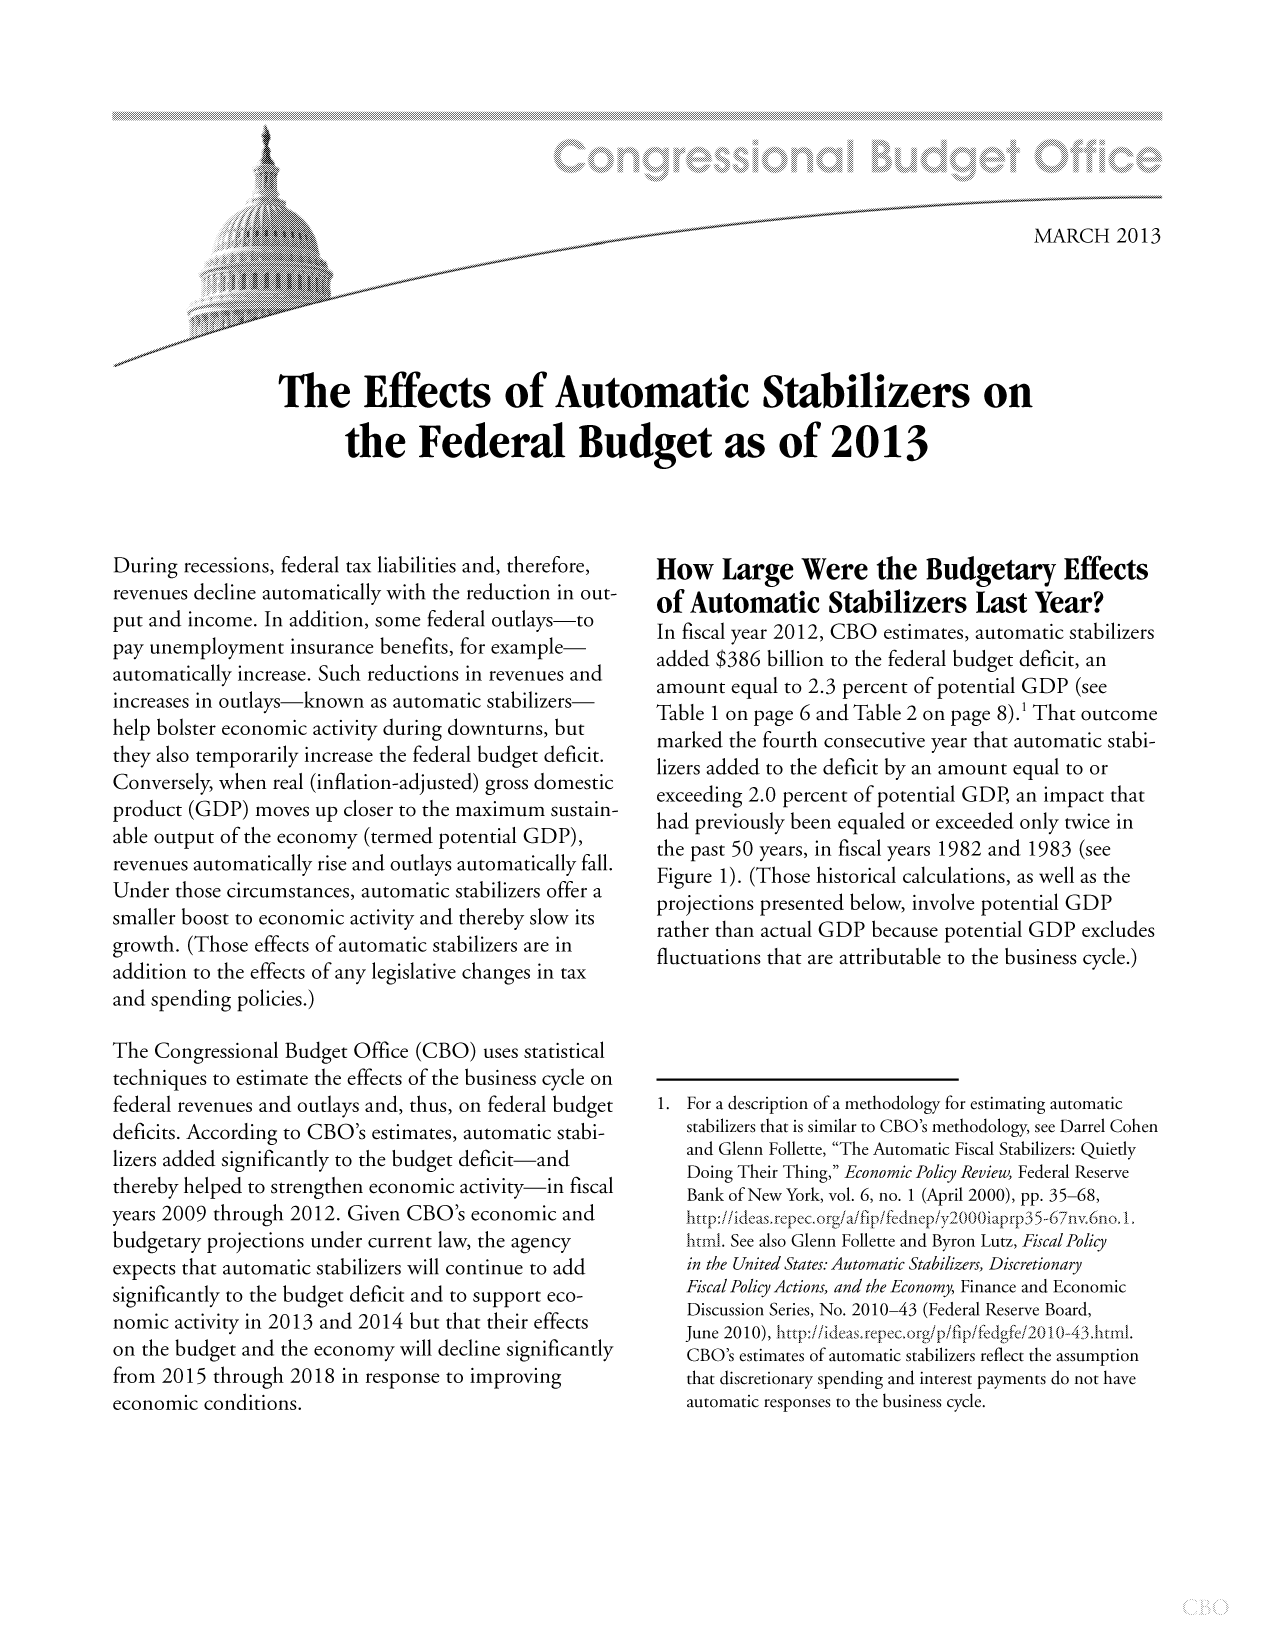 handle is hein.congrec/cbo10984 and id is 1 raw text is: MARCH 2013
The Effects of Automatic Stabilizers on
the Federal Budget as of 2013

During recessions, federal tax liabilities and, therefore,
revenues decline automatically with the reduction in out-
put and income. In addition, some federal outlays-to
pay unemployment insurance benefits, for example
automatically increase. Such reductions in revenues and
increases in outlays-known as automatic stabilizers
help bolster economic activity during downturns, but
they also temporarily increase the federal budget deficit.
Conversely, when real (inflation-adjusted) gross domestic
product (GDP) moves up closer to the maximum sustain-
able output of the economy (termed potential GDP),
revenues automatically rise and outlays automatically fall.
Under those circumstances, automatic stabilizers offer a
smaller boost to economic activity and thereby slow its
growth. (Those effects of automatic stabilizers are in
addition to the effects of any legislative changes in tax
and spending policies.)
The Congressional Budget Office (CBO) uses statistical
techniques to estimate the effects of the business cycle on
federal revenues and outlays and, thus, on federal budget
deficits. According to CBO's estimates, automatic stabi-
lizers added significantly to the budget deficit-and
thereby helped to strengthen economic activity-in fiscal
years 2009 through 2012. Given CBO's economic and
budgetary projections under current law, the agency
expects that automatic stabilizers will continue to add
significantly to the budget deficit and to support eco-
nomic activity in 2013 and 2014 but that their effects
on the budget and the economy will decline significantly
from 2015 through 2018 in response to improving
economic conditions.

How Large Were the Budgetary Effects
of Automatic Stabilizers Last Year?
In fiscal year 2012, CBO estimates, automatic stabilizers
added $386 billion to the federal budget deficit, an
amount equal to 2.3 percent of potential GDP (see
Table 1 on page 6 and Table 2 on page 8).' That outcome
marked the fourth consecutive year that automatic stabi-
lizers added to the deficit by an amount equal to or
exceeding 2.0 percent of potential GDP, an impact that
had previously been equaled or exceeded only twice in
the past 50 years, in fiscal years 1982 and 1983 (see
Figure 1). (Those historical calculations, as well as the
projections presented below, involve potential GDP
rather than actual GDP because potential GDP excludes
fluctuations that are attributable to the business cycle.)
1. For a description of a methodology for estimating automatic
stabilizers that is similar to CBO's methodology, see Darrel Cohen
and Glenn Follette, The Automatic Fiscal Stabilizers: Quietly
Doing Their Thing, Economic Policy Review, Federal Reserve
Bank of New York, vol. 6, no. 1 (April 2000), pp. 35-68,
http://ideas.repec.org/a/fip/fednep/y2000iaprp35-67ny.6no.1.
html. See also Glenn Follette and Byron Lutz, Fiscal Policy
in the United States: Automatic Stabilizers, Discretionary
Fiscal Policy Actions, and the Economy, Finance and Economic
Discussion Series, No. 2010-43 (Federal Reserve Board,
June 2010), http://ideas.repec.org/p/fip/fedgfe/2010-43,html.
CBO's estimates of automatic stabilizers reflect the assumption
that discretionary spending and interest payments do not have
automatic responses to the business cycle.


